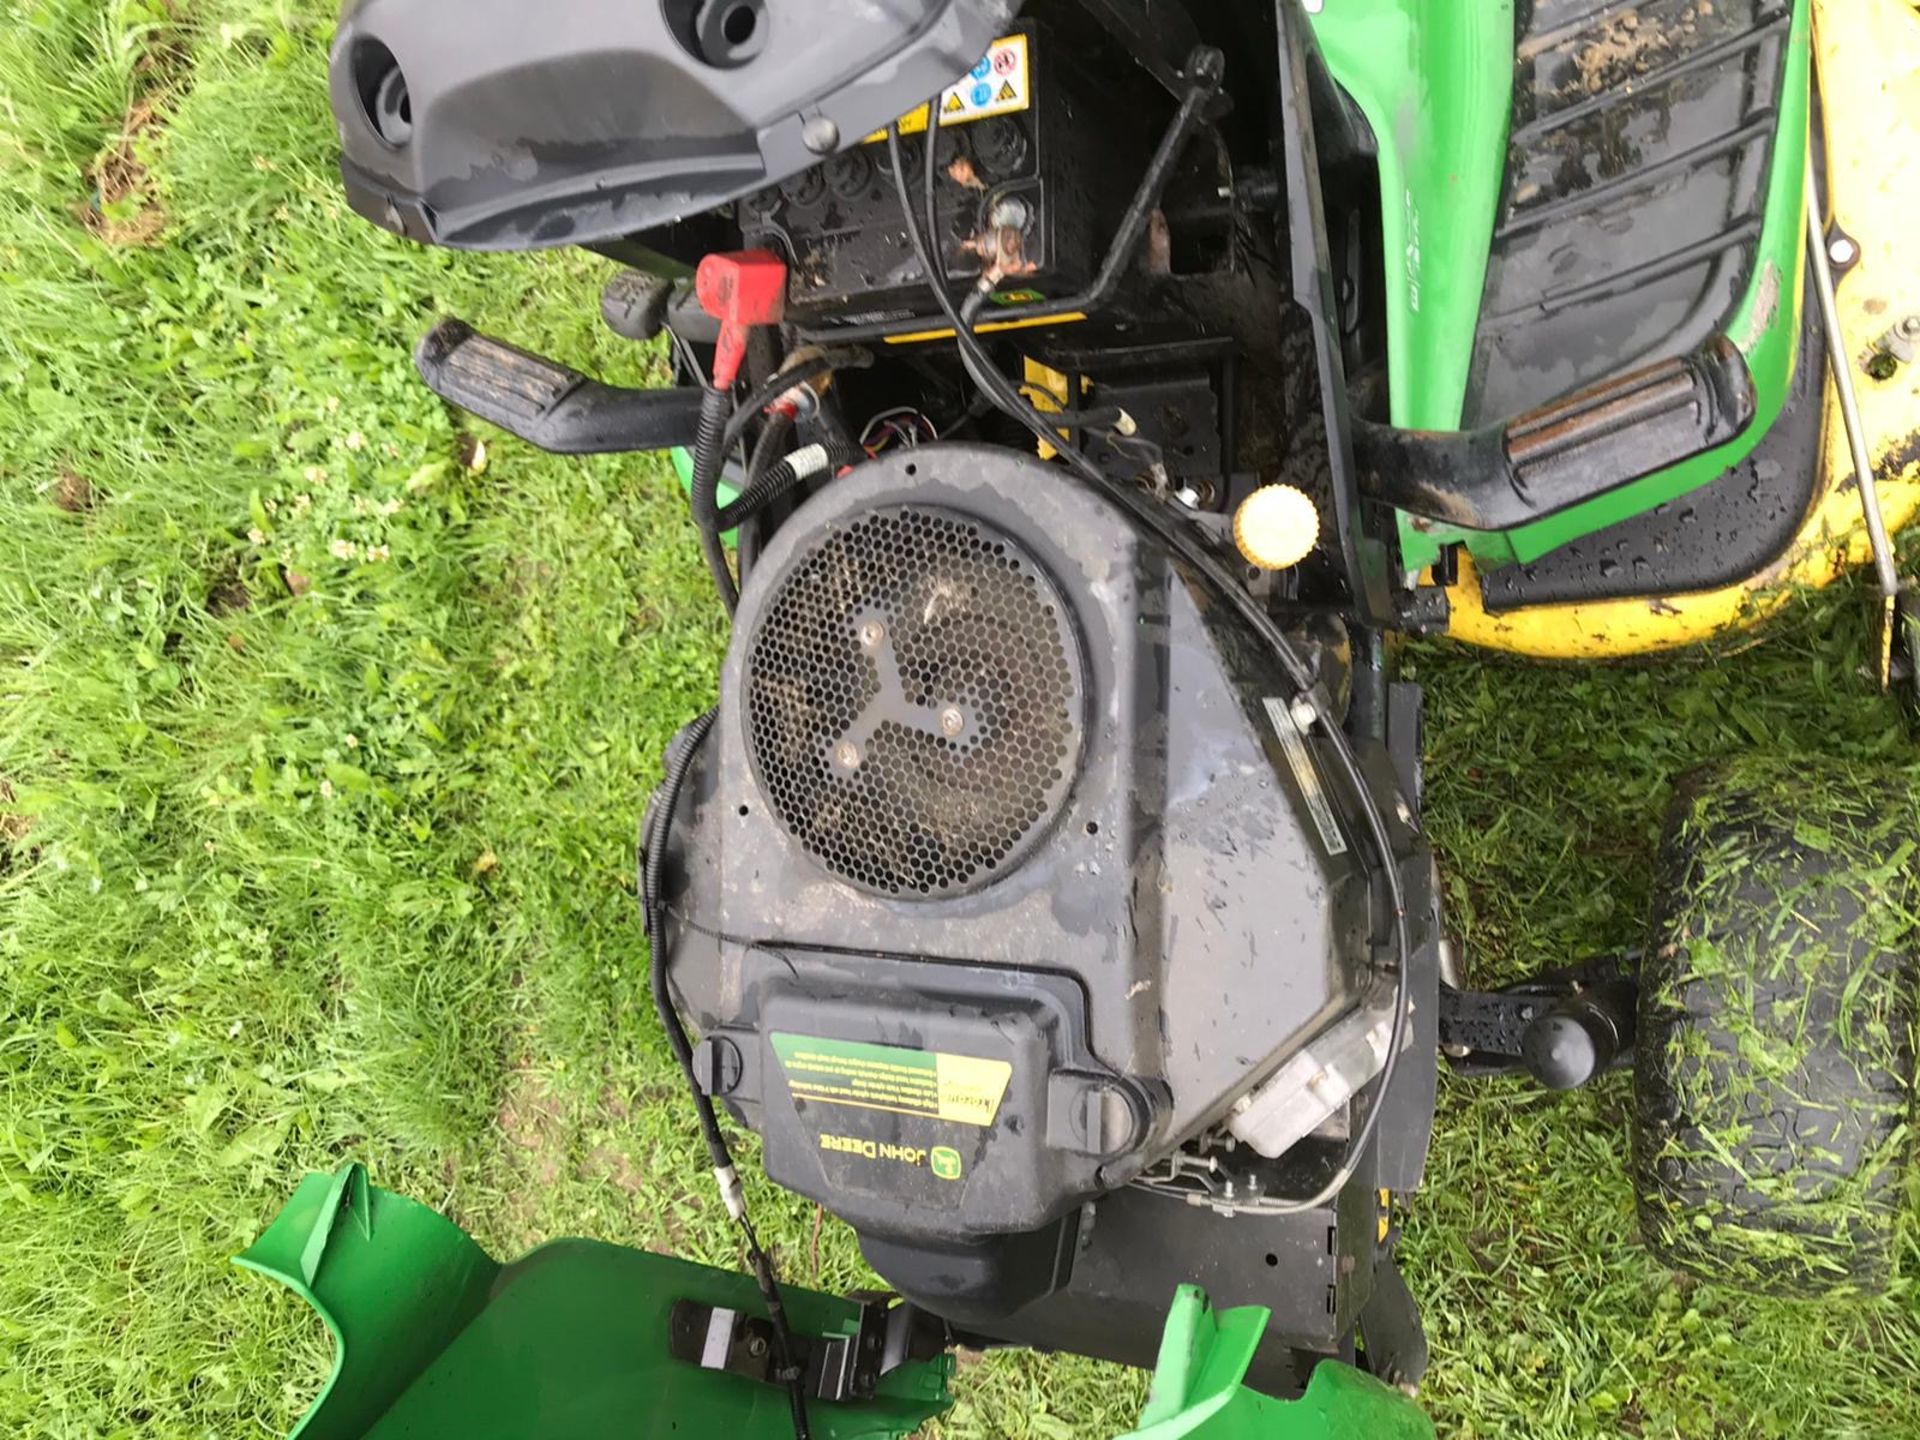 JOHN DEERE X320 RIDE ON LAWN MOWER, C/W 42" MID MOUNTED DECK, YEAR 2013, WORKING HOURS 1237 - Image 7 of 7